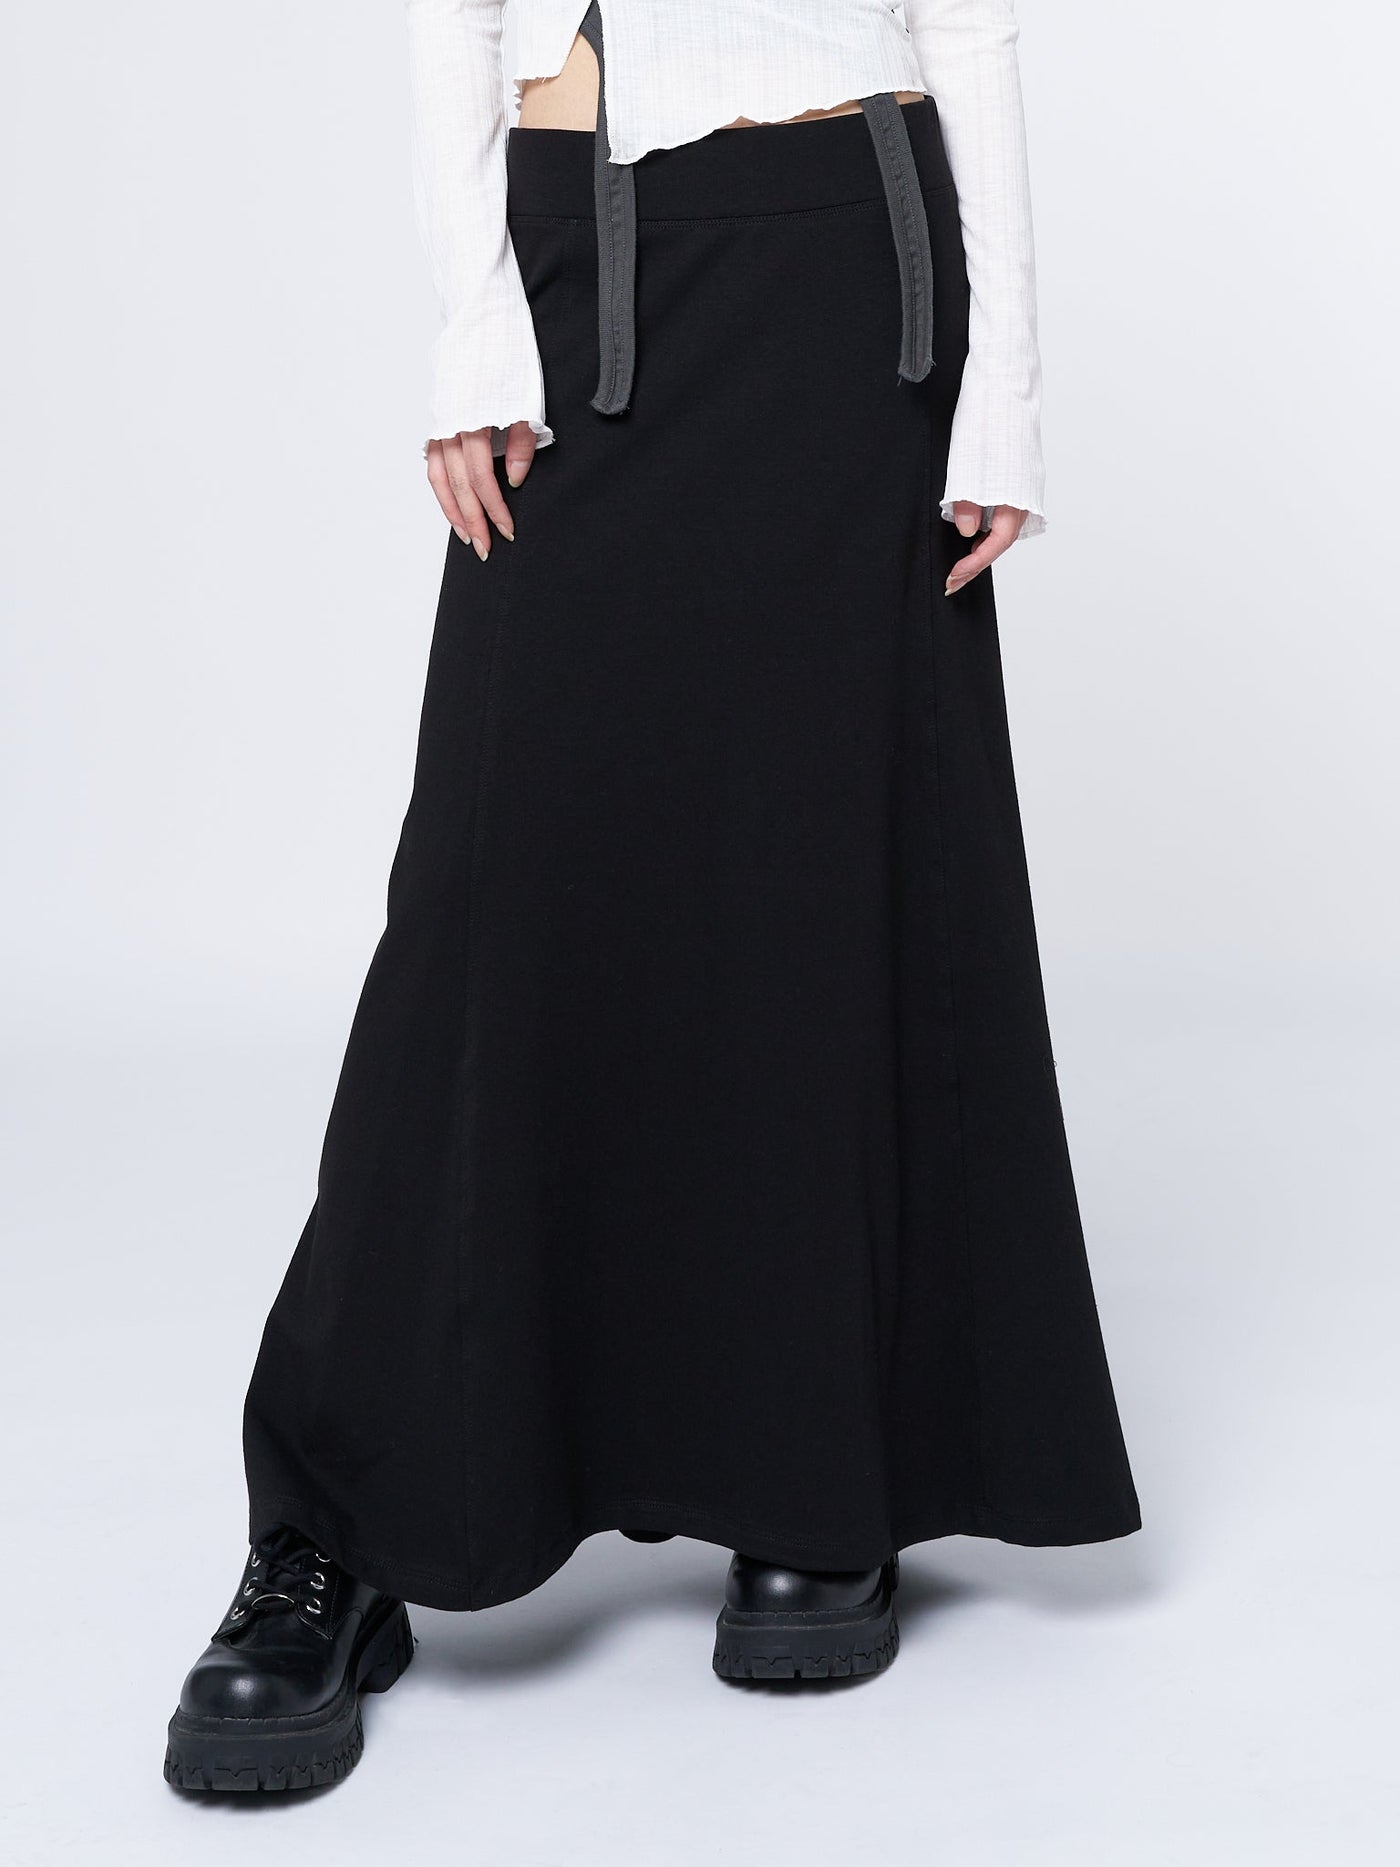 Aria Black Lined Maxi Skirt